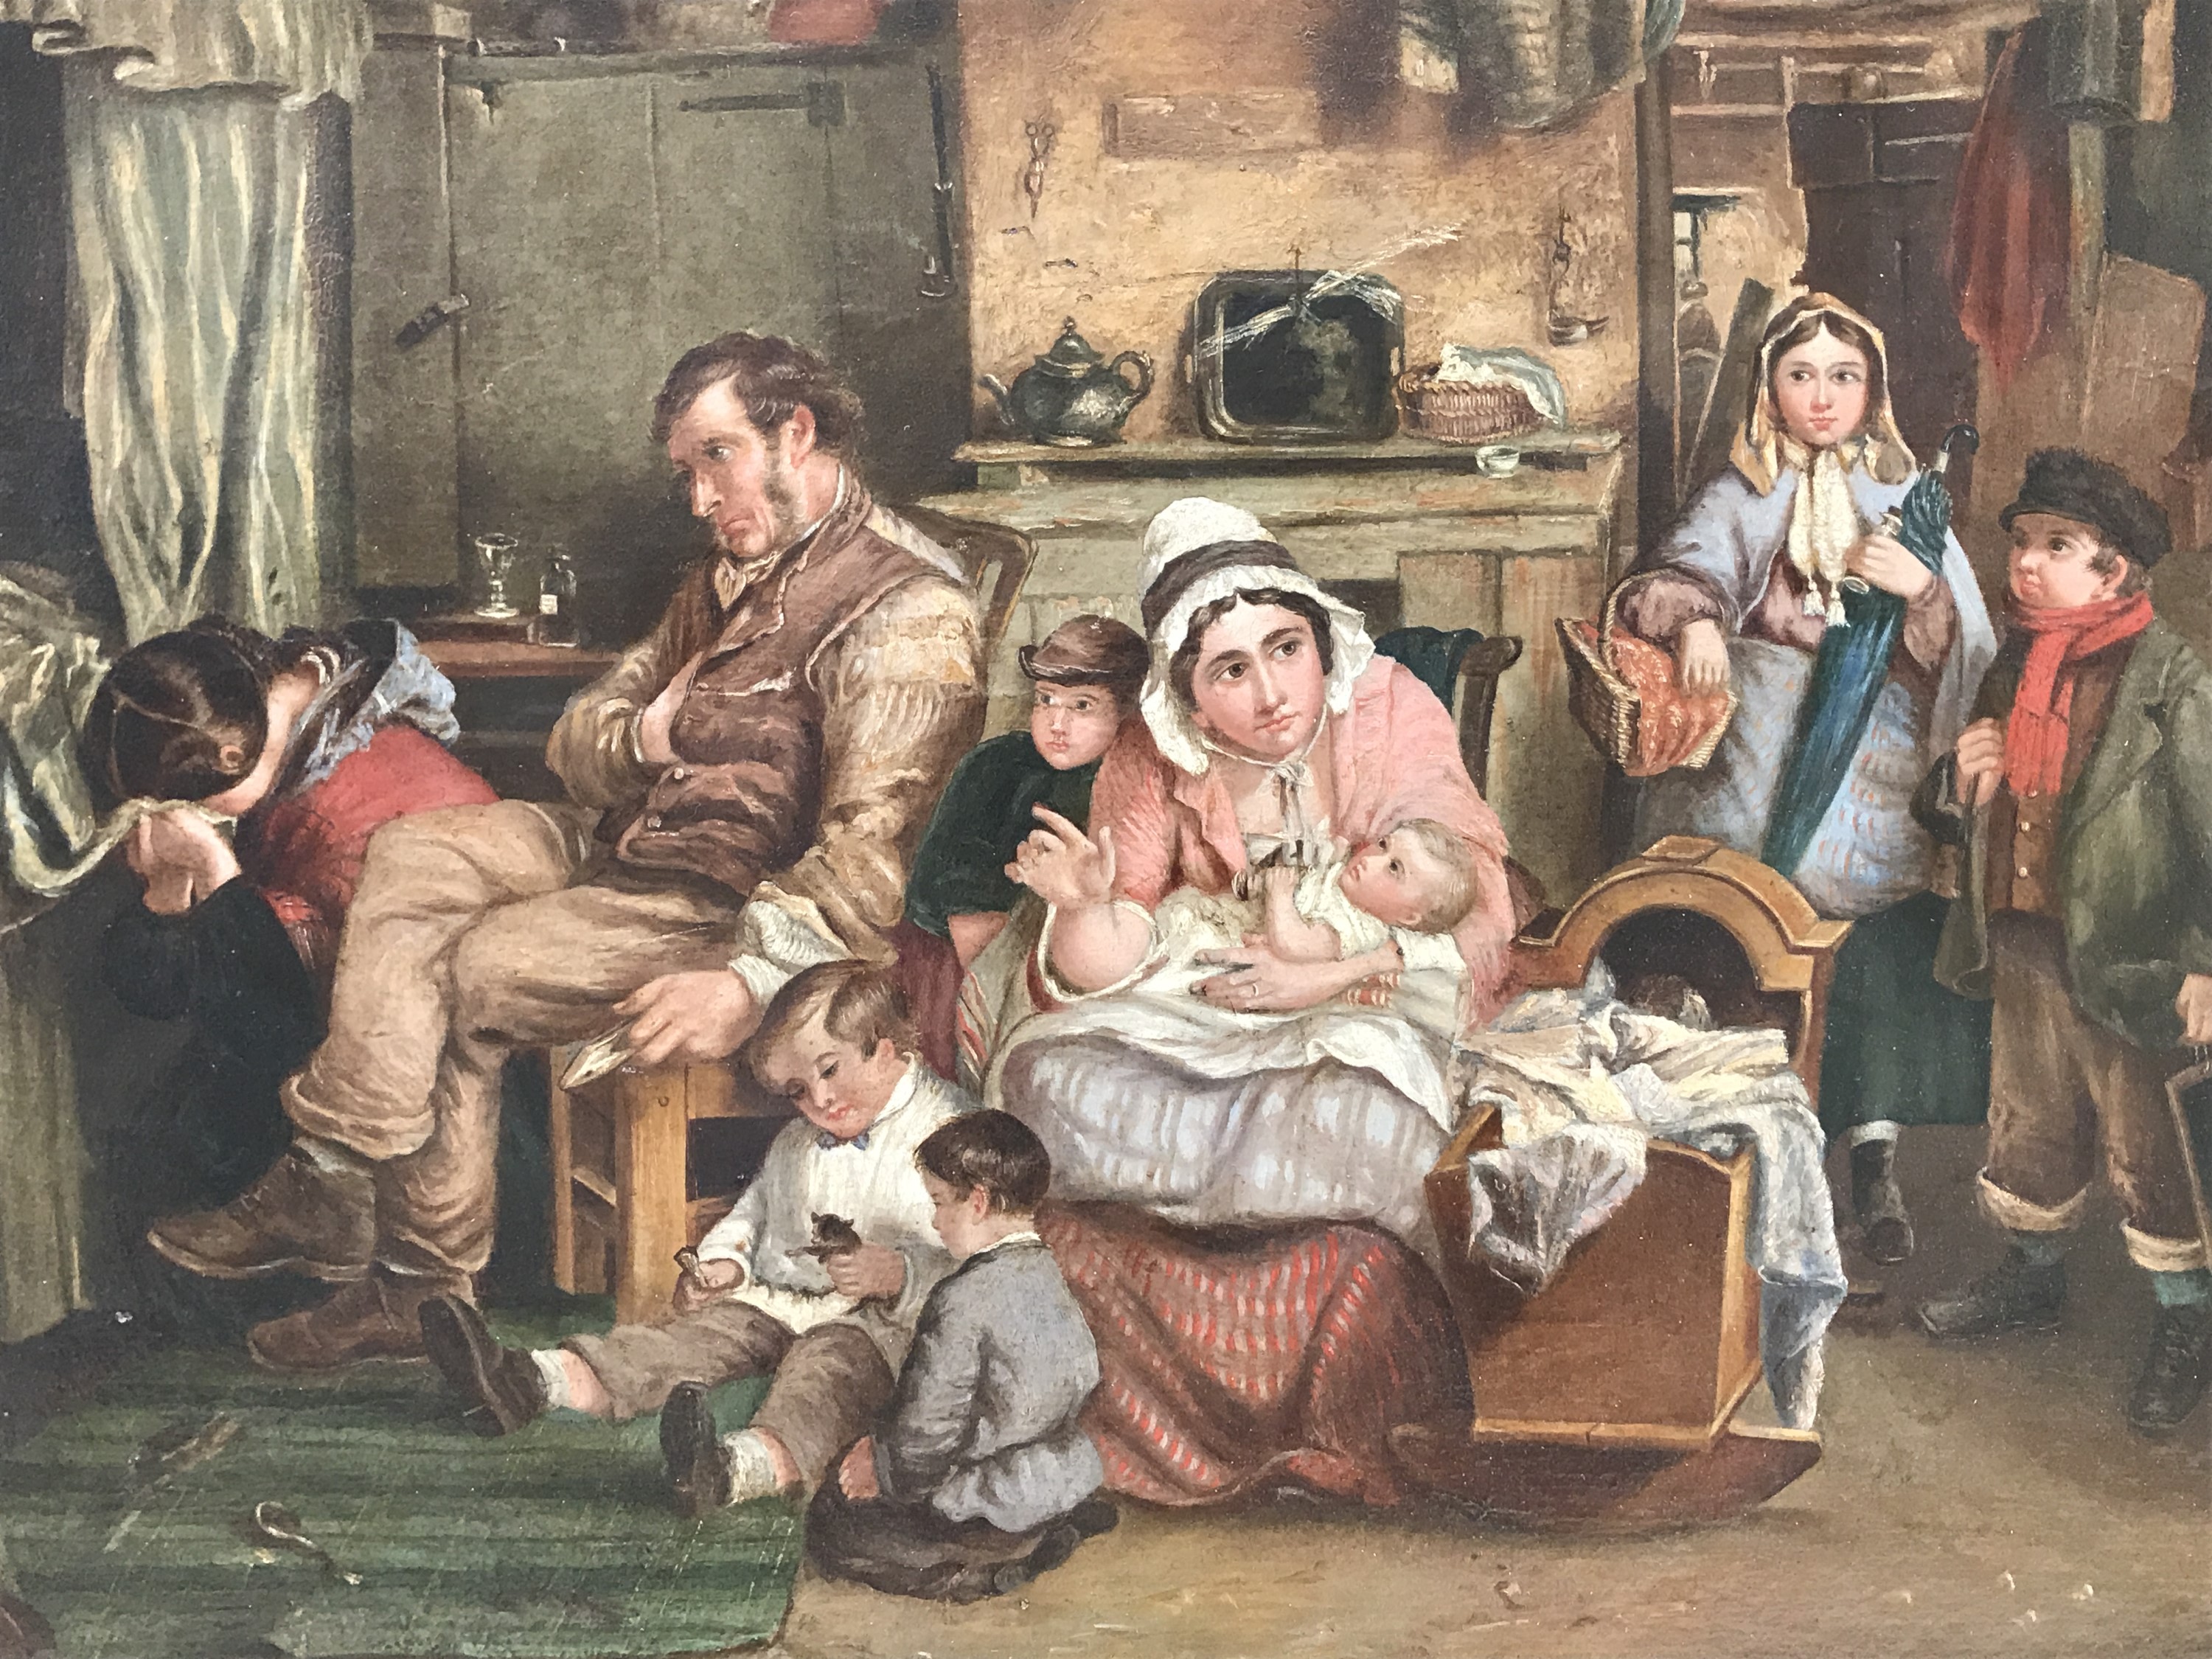 (19th Century) A sentimental interior scene depicting a family gathered around a relative's